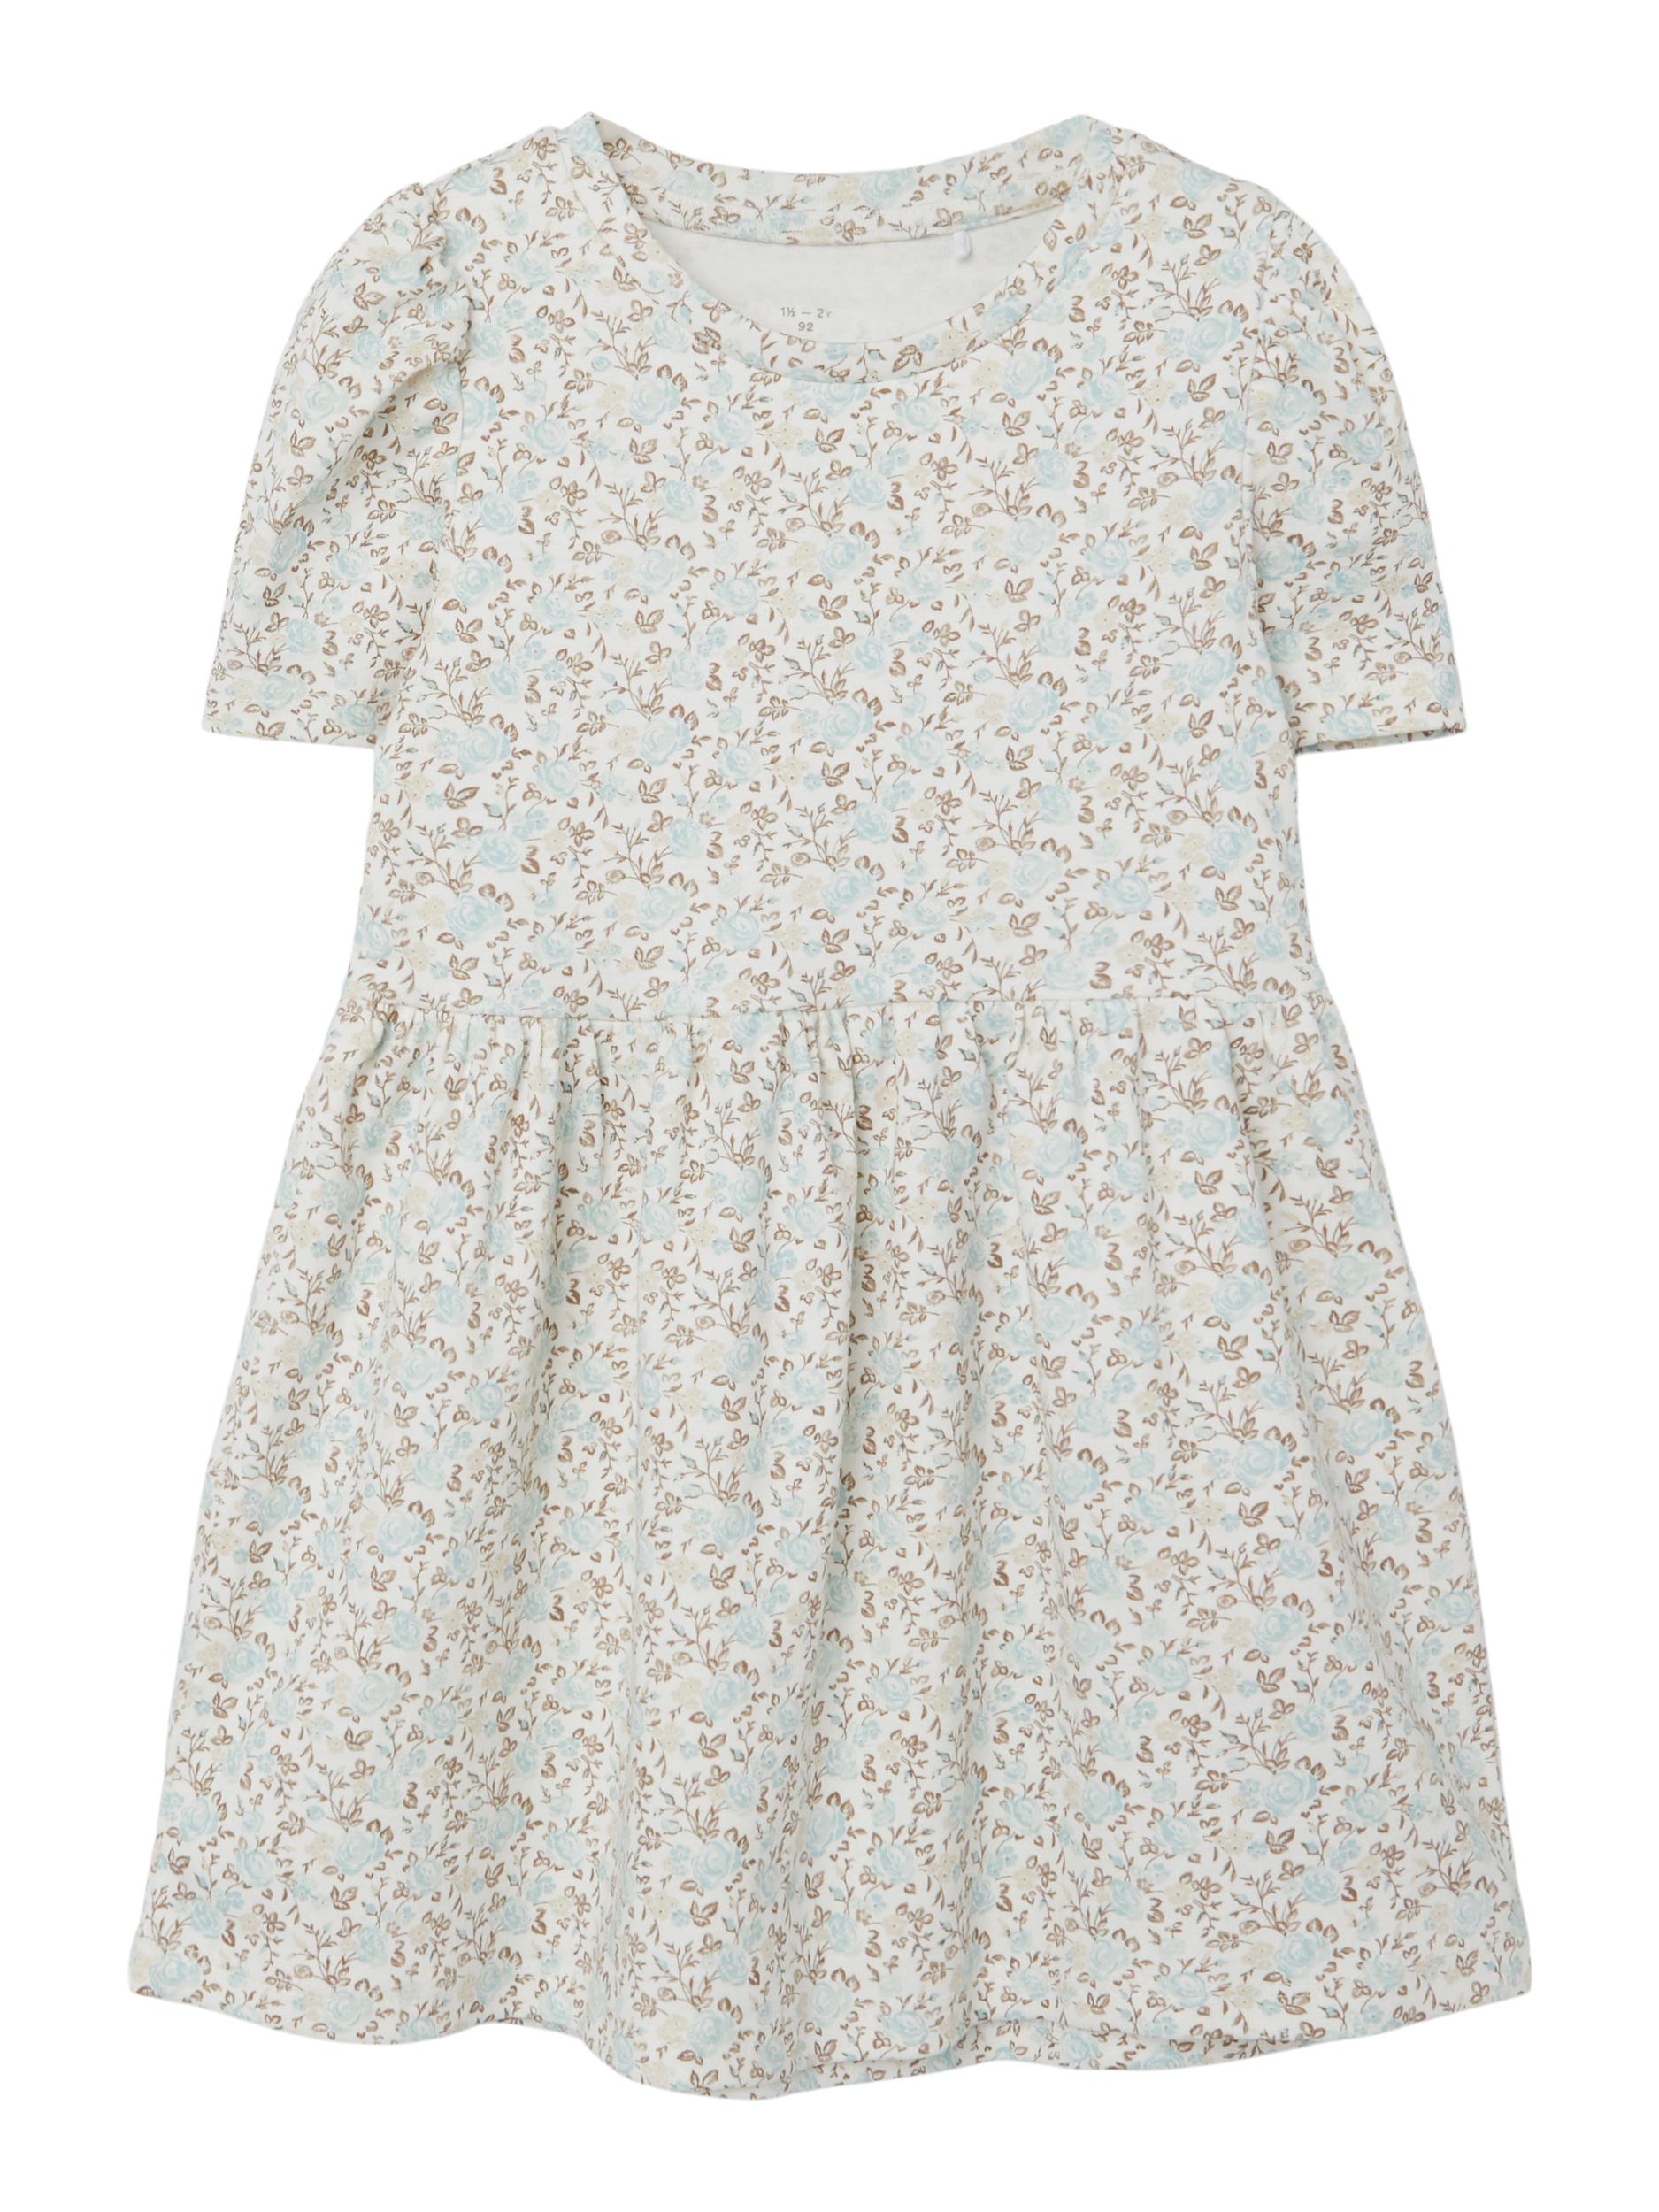 Justice Short Sleeve Dress - White Alyssum Front View